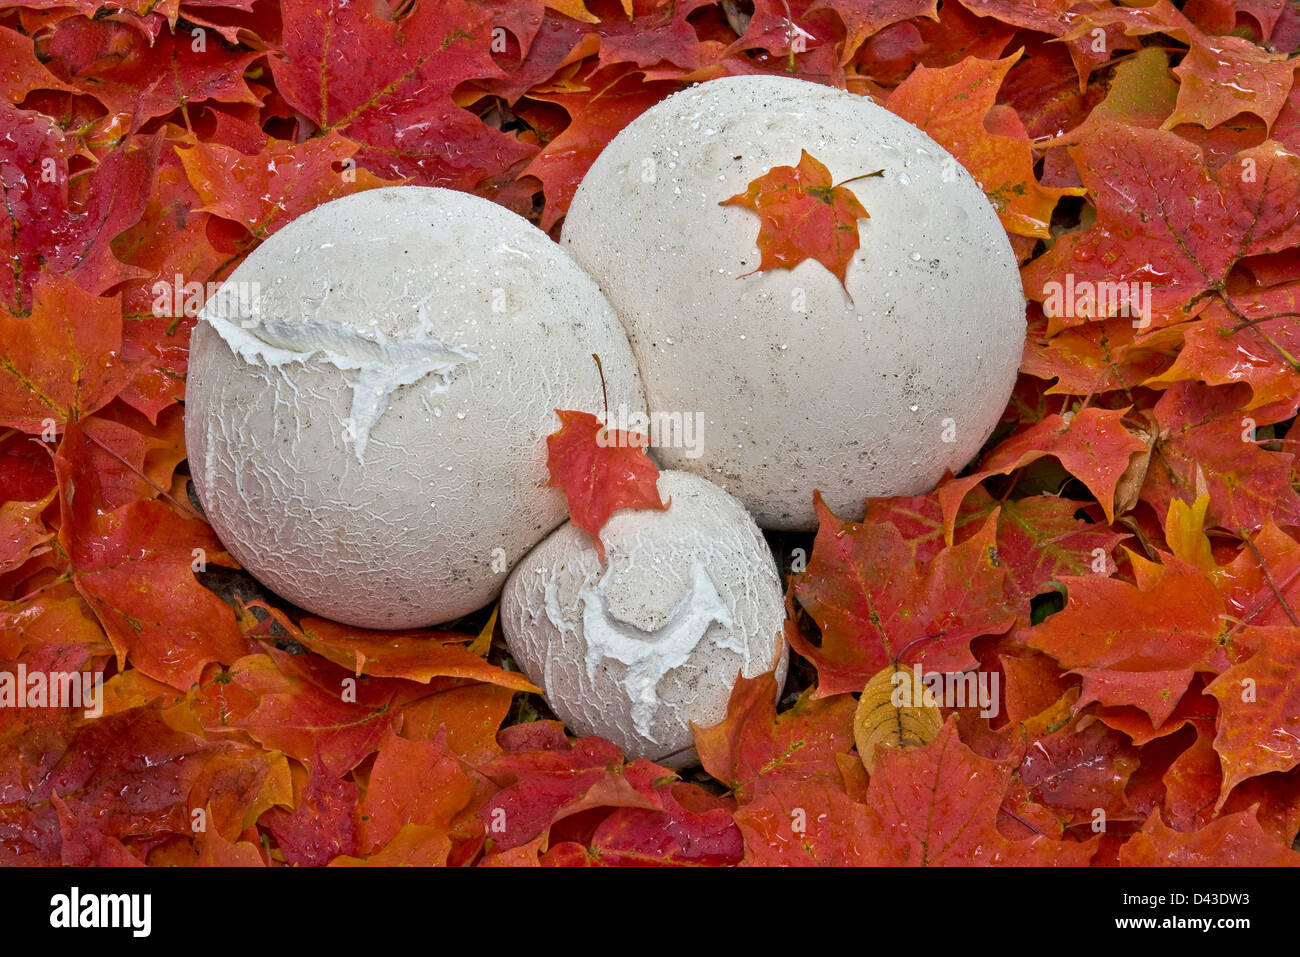 Giant puffball mushrooms (Calvatia gigantea) after rain, Autumn forest with Red Maple Leaves ( Acer rubrum ) Eastern USA Stock Photo